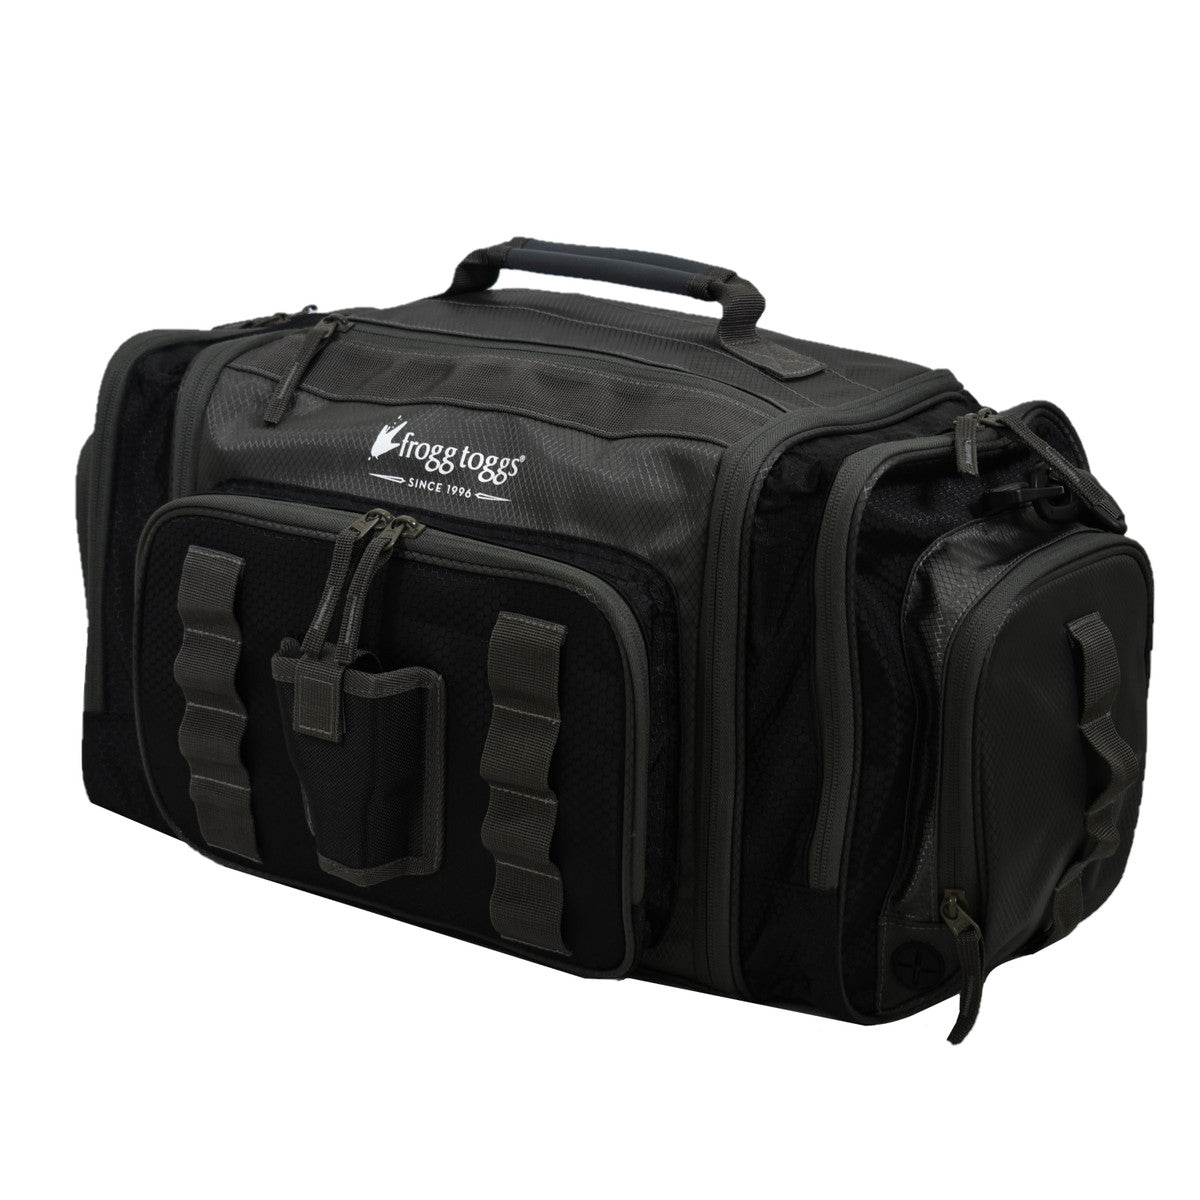 FROGG TOGGS 3600 TACKLE BAG BLACK 3 EACH 3600 TACKLE TRAYS INCLUDED